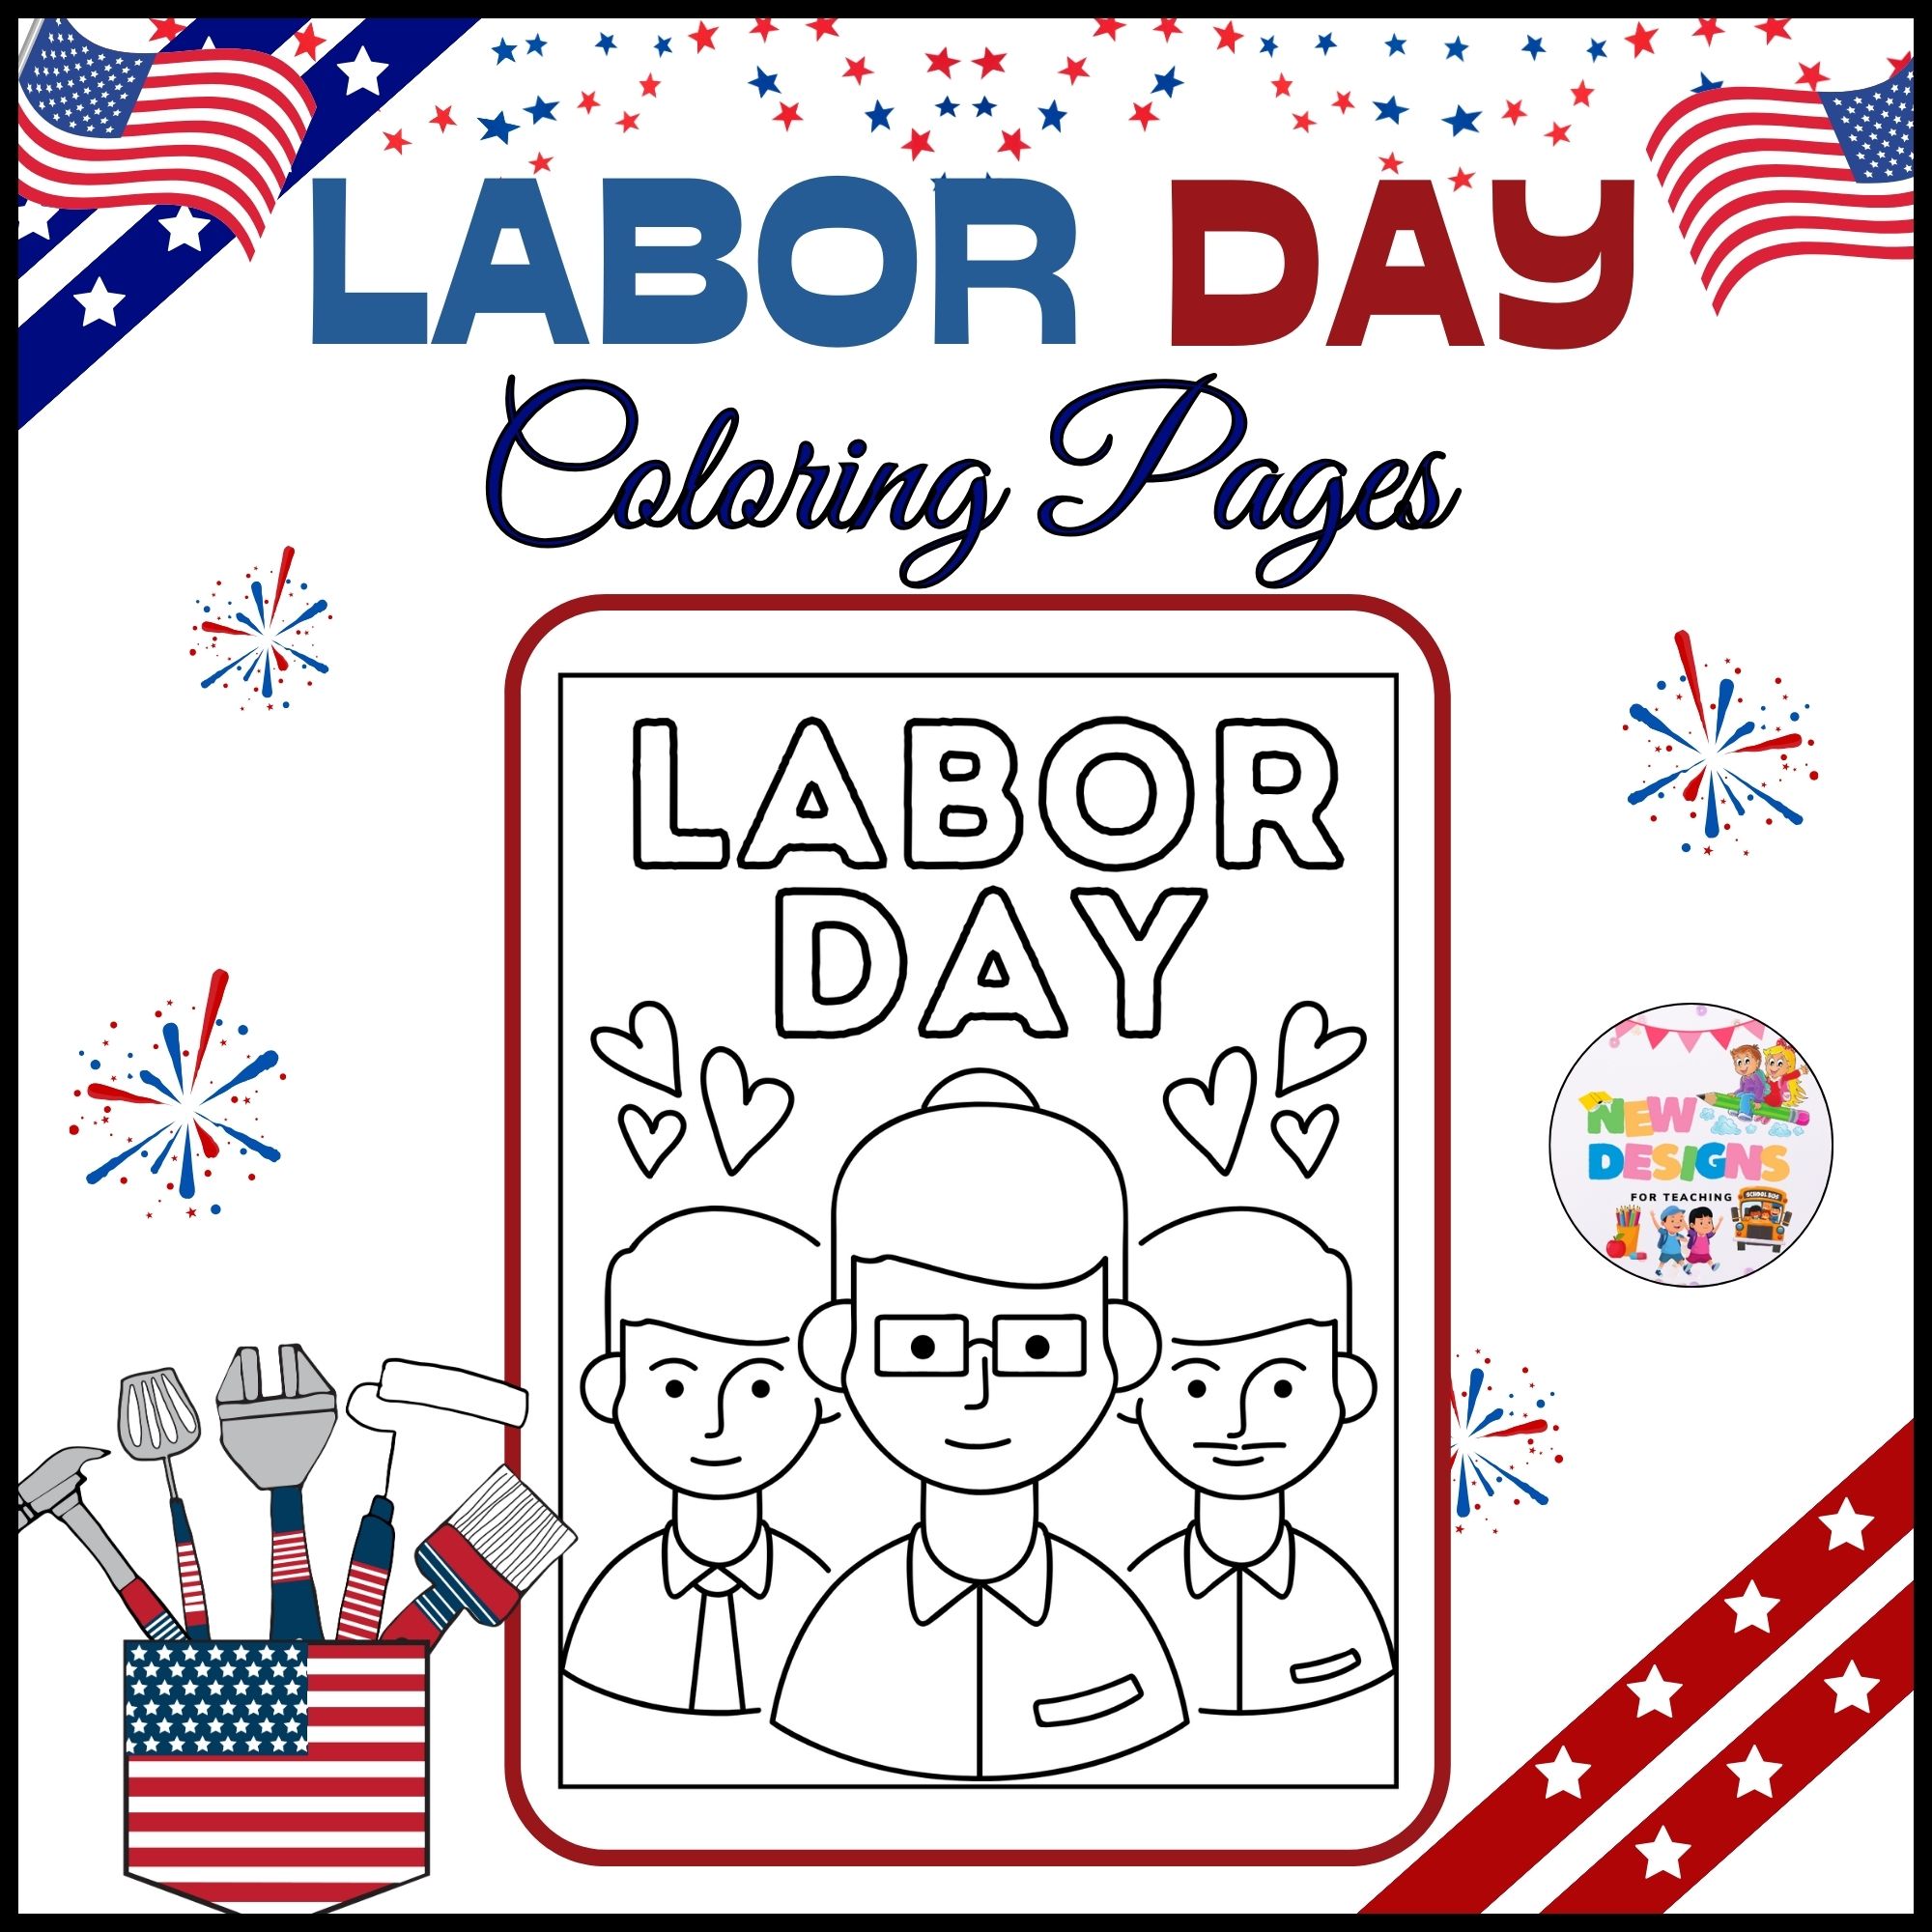 Labor day coloring pages printable worksheets for kids made by teachers